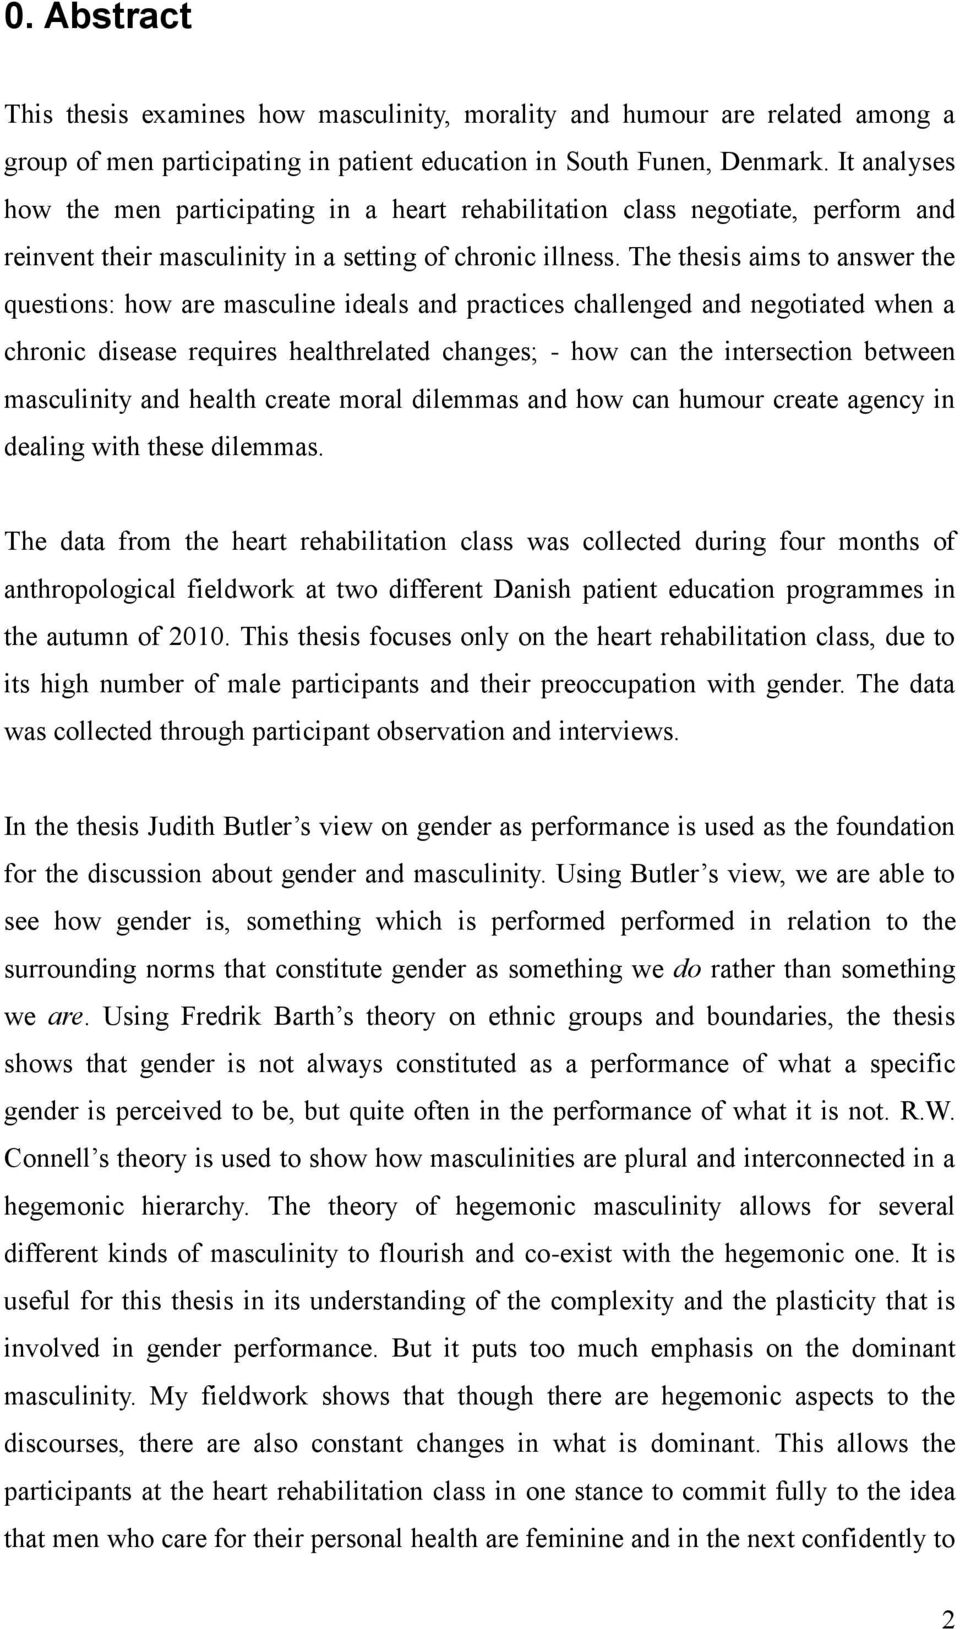 The thesis aims to answer the questions: how are masculine ideals and practices challenged and negotiated when a chronic disease requires healthrelated changes; - how can the intersection between